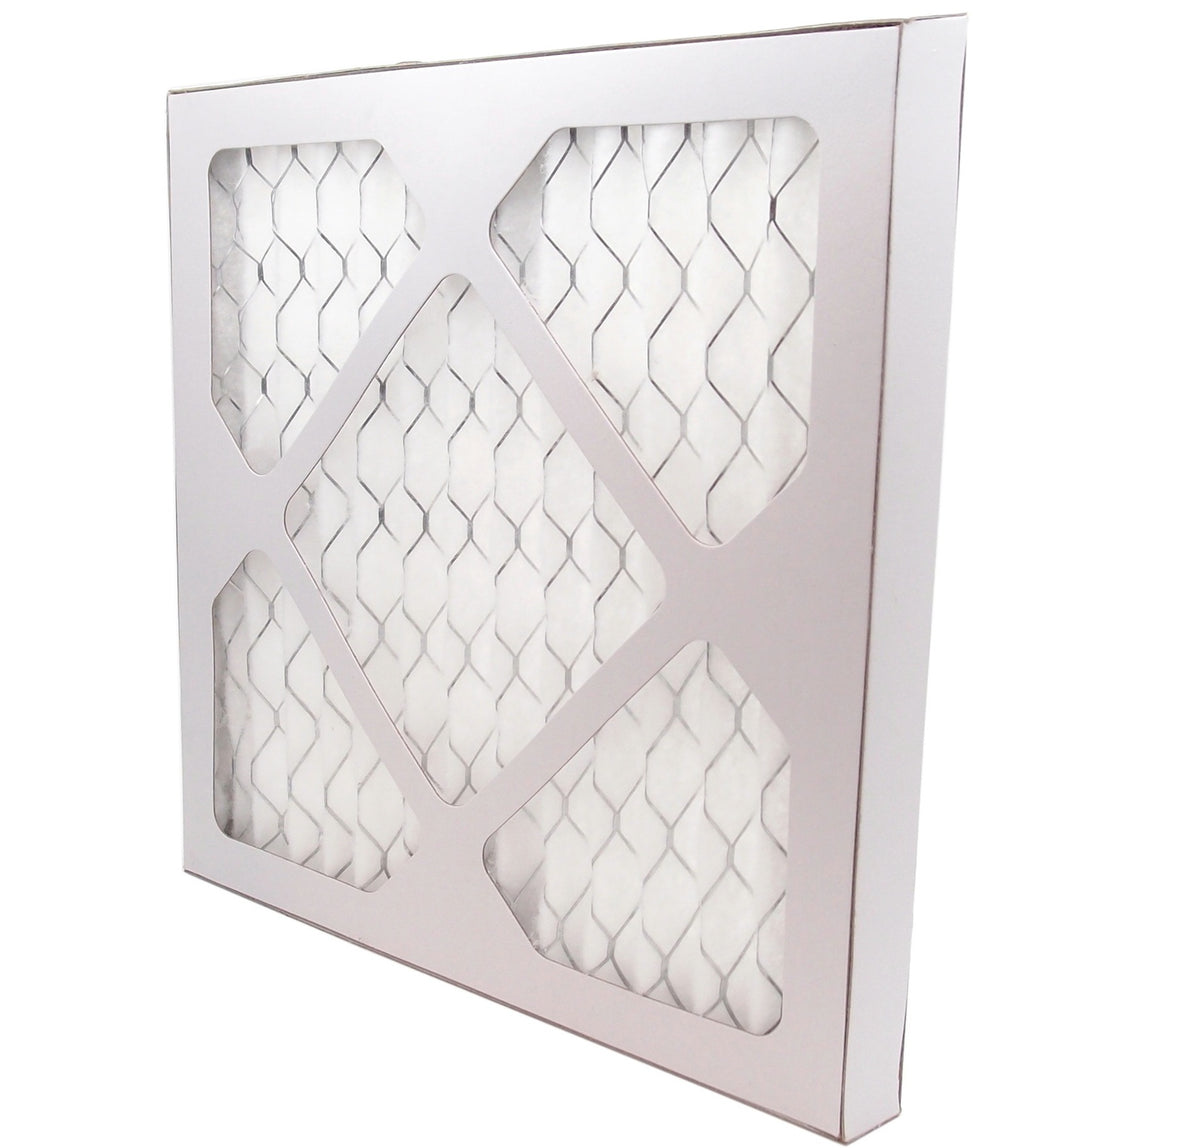 22&quot; x 26&quot; Pleated MERV 8 Filter for HVAC Return Filter Grille